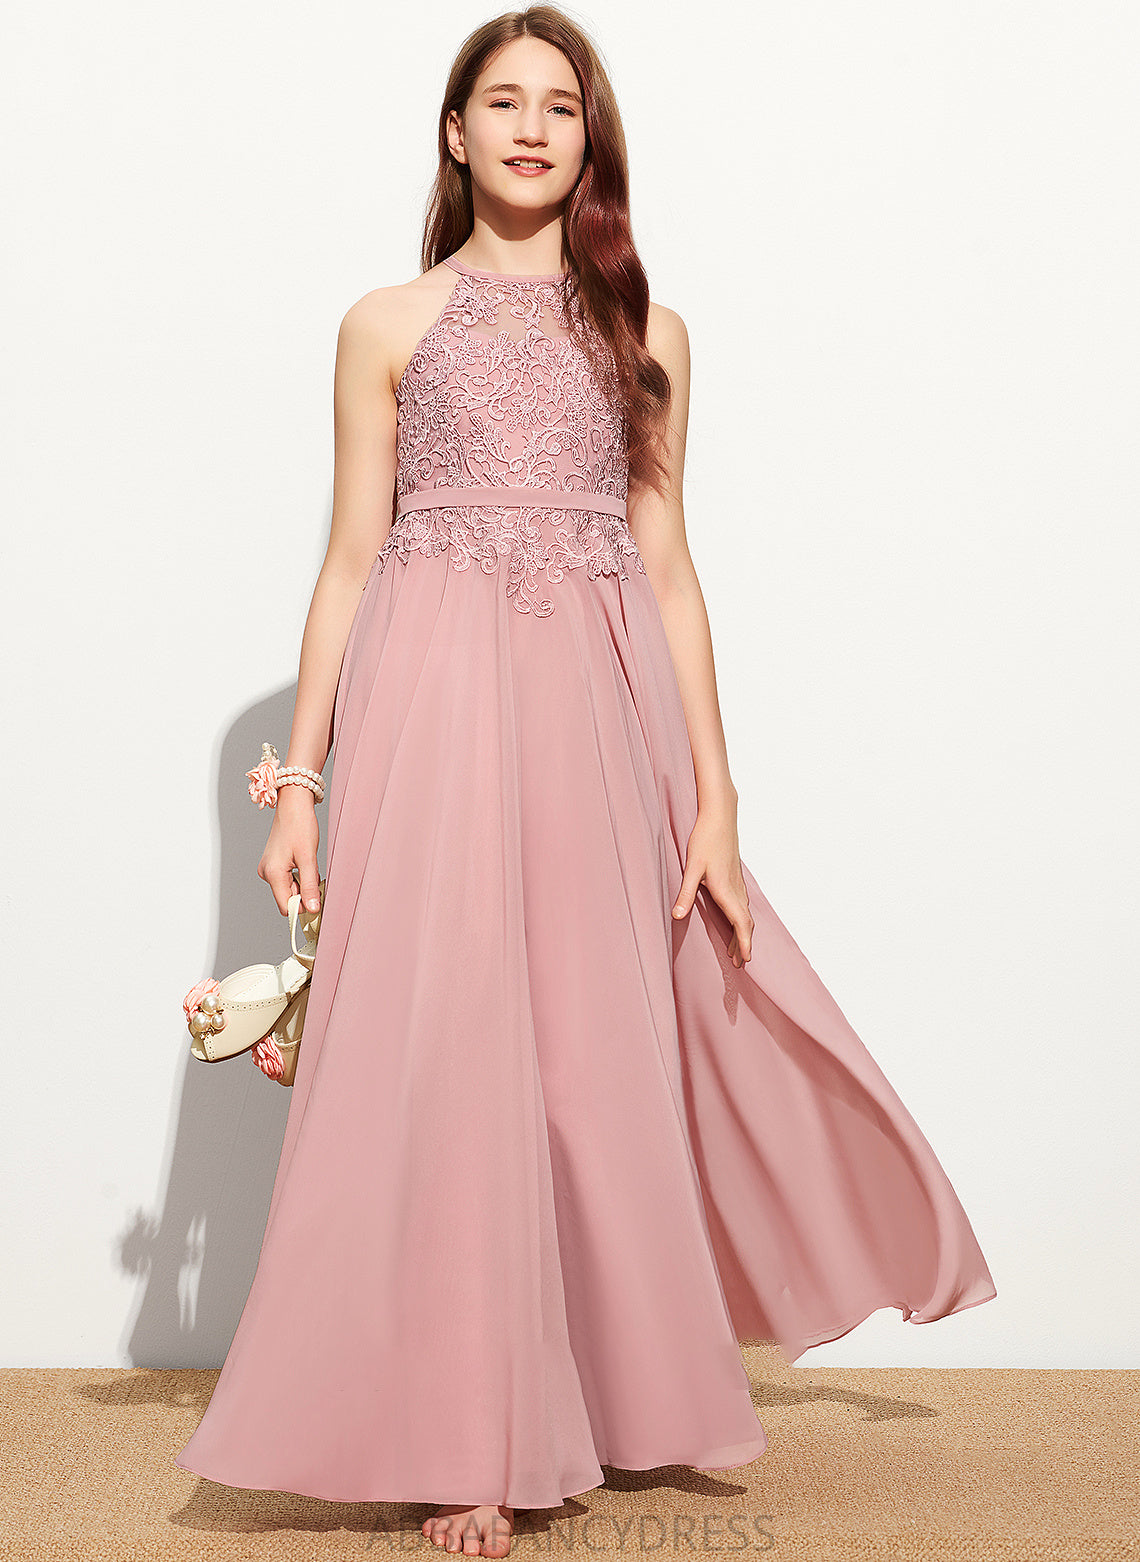 Chiffon Junior Bridesmaid Dresses Lace A-Line Brynlee Neck Floor-Length Scoop